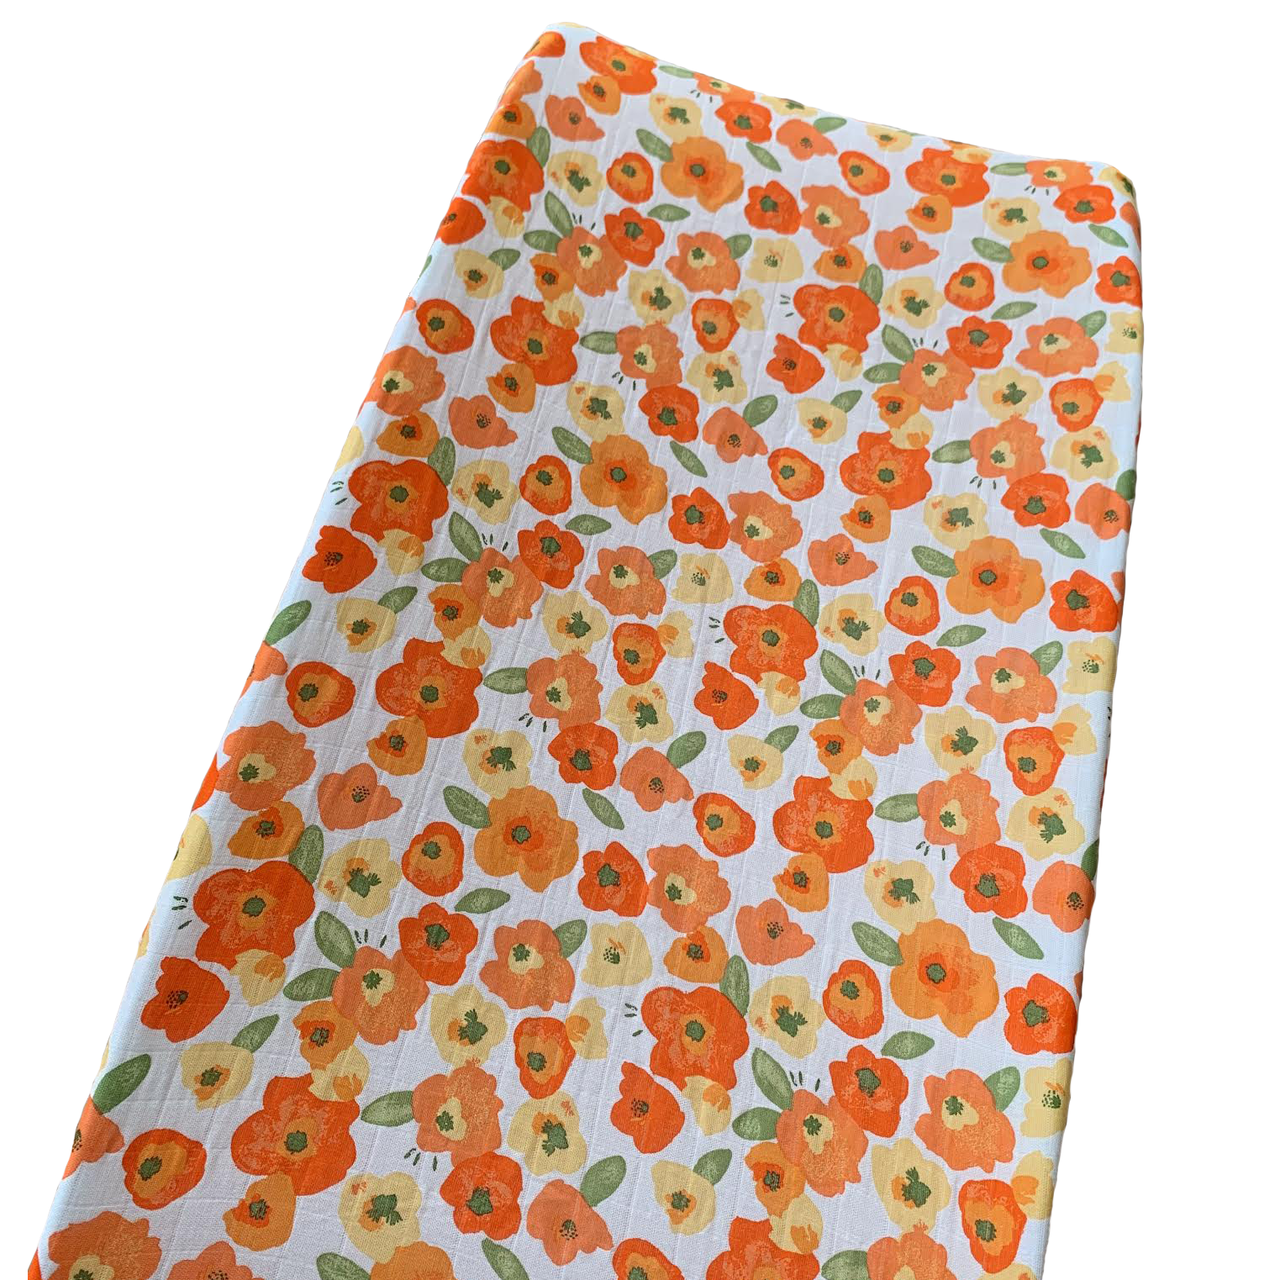 SpearmintLOVE’s baby Muslin Changing Pad Cover, Poppies